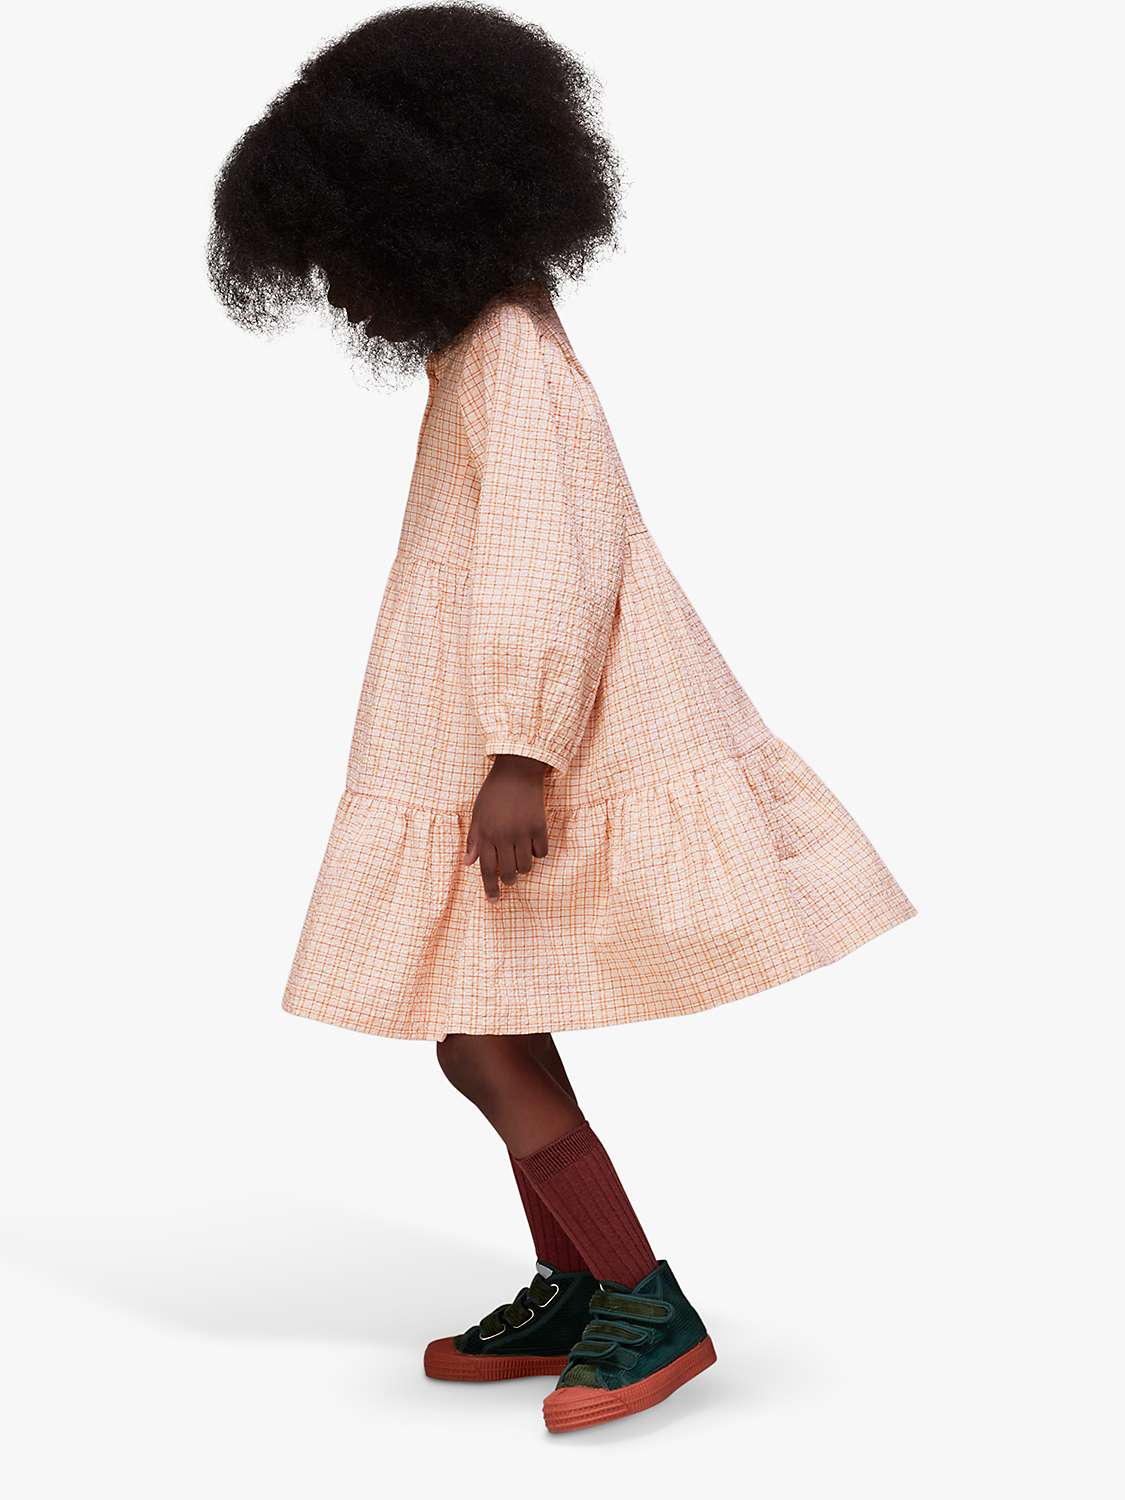 Buy Whistles Kids' Nora Check Tiered Dress, Pale Pink/Multi Online at johnlewis.com